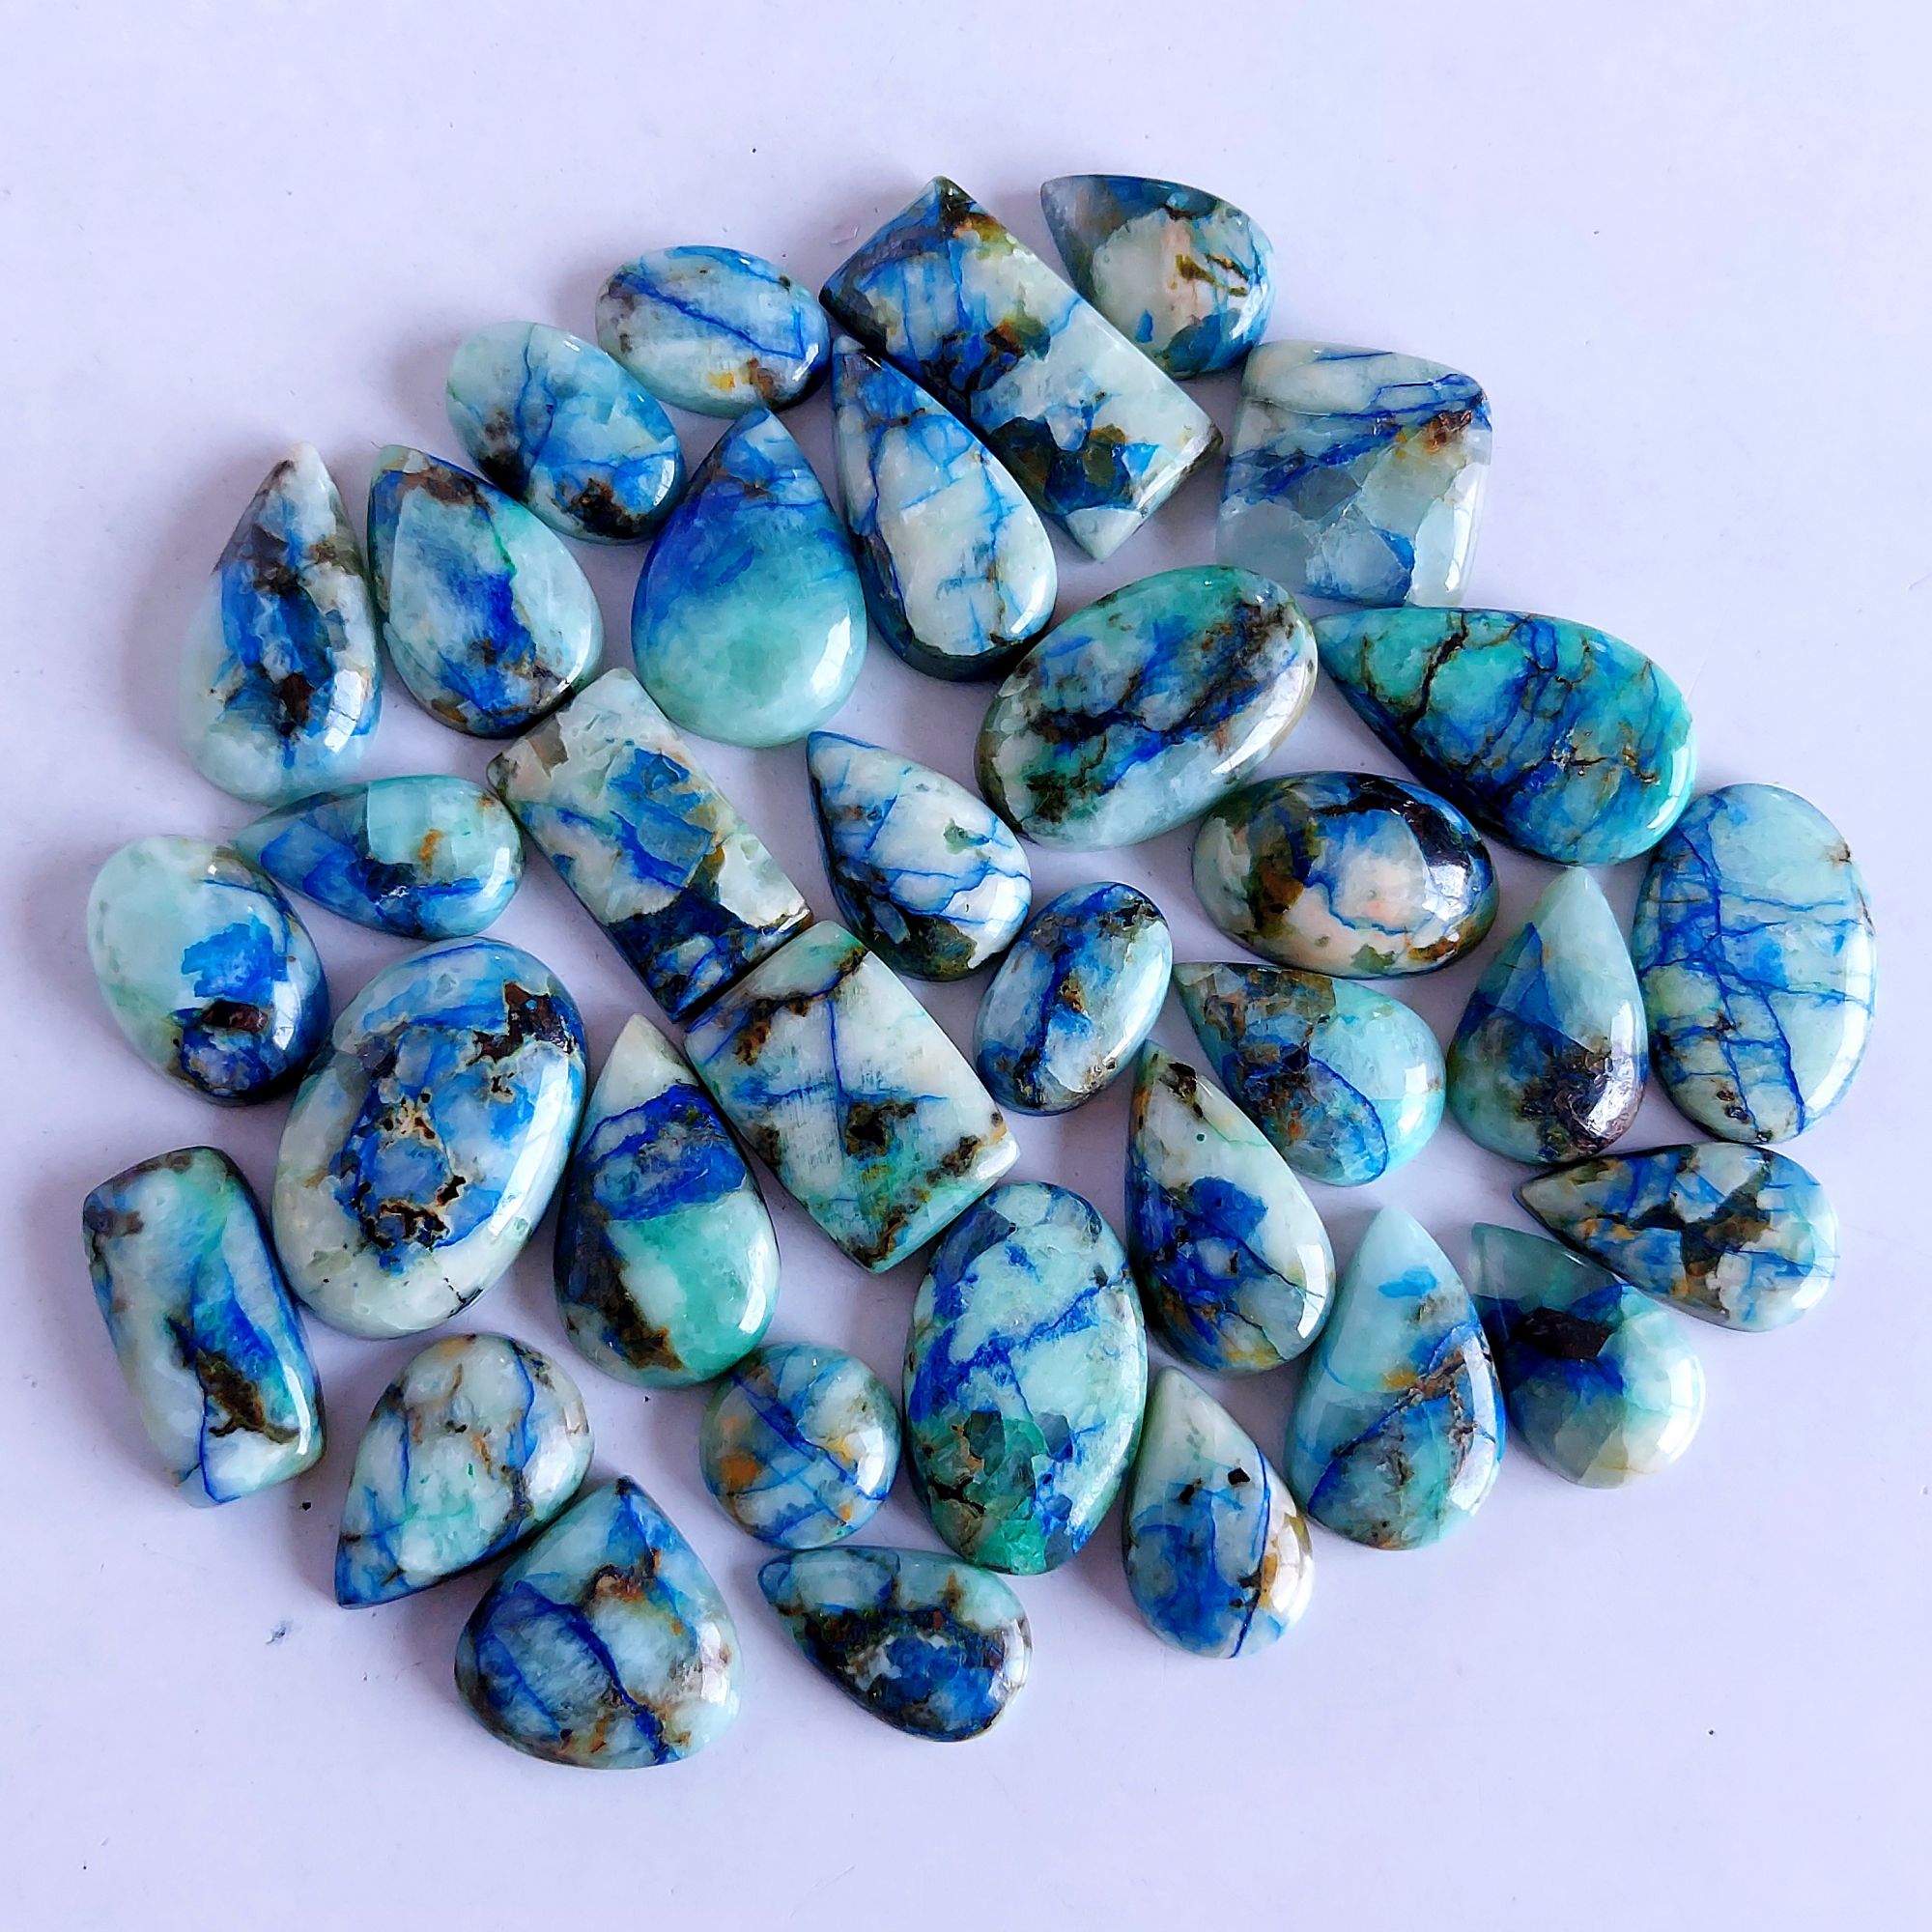 417.Cts 34 Pcs Natural Smooth Azurite Mix Loose Gemstone Cabochon Lot Size 26x12 13x13mm Wholesale Gemstone For jewelry